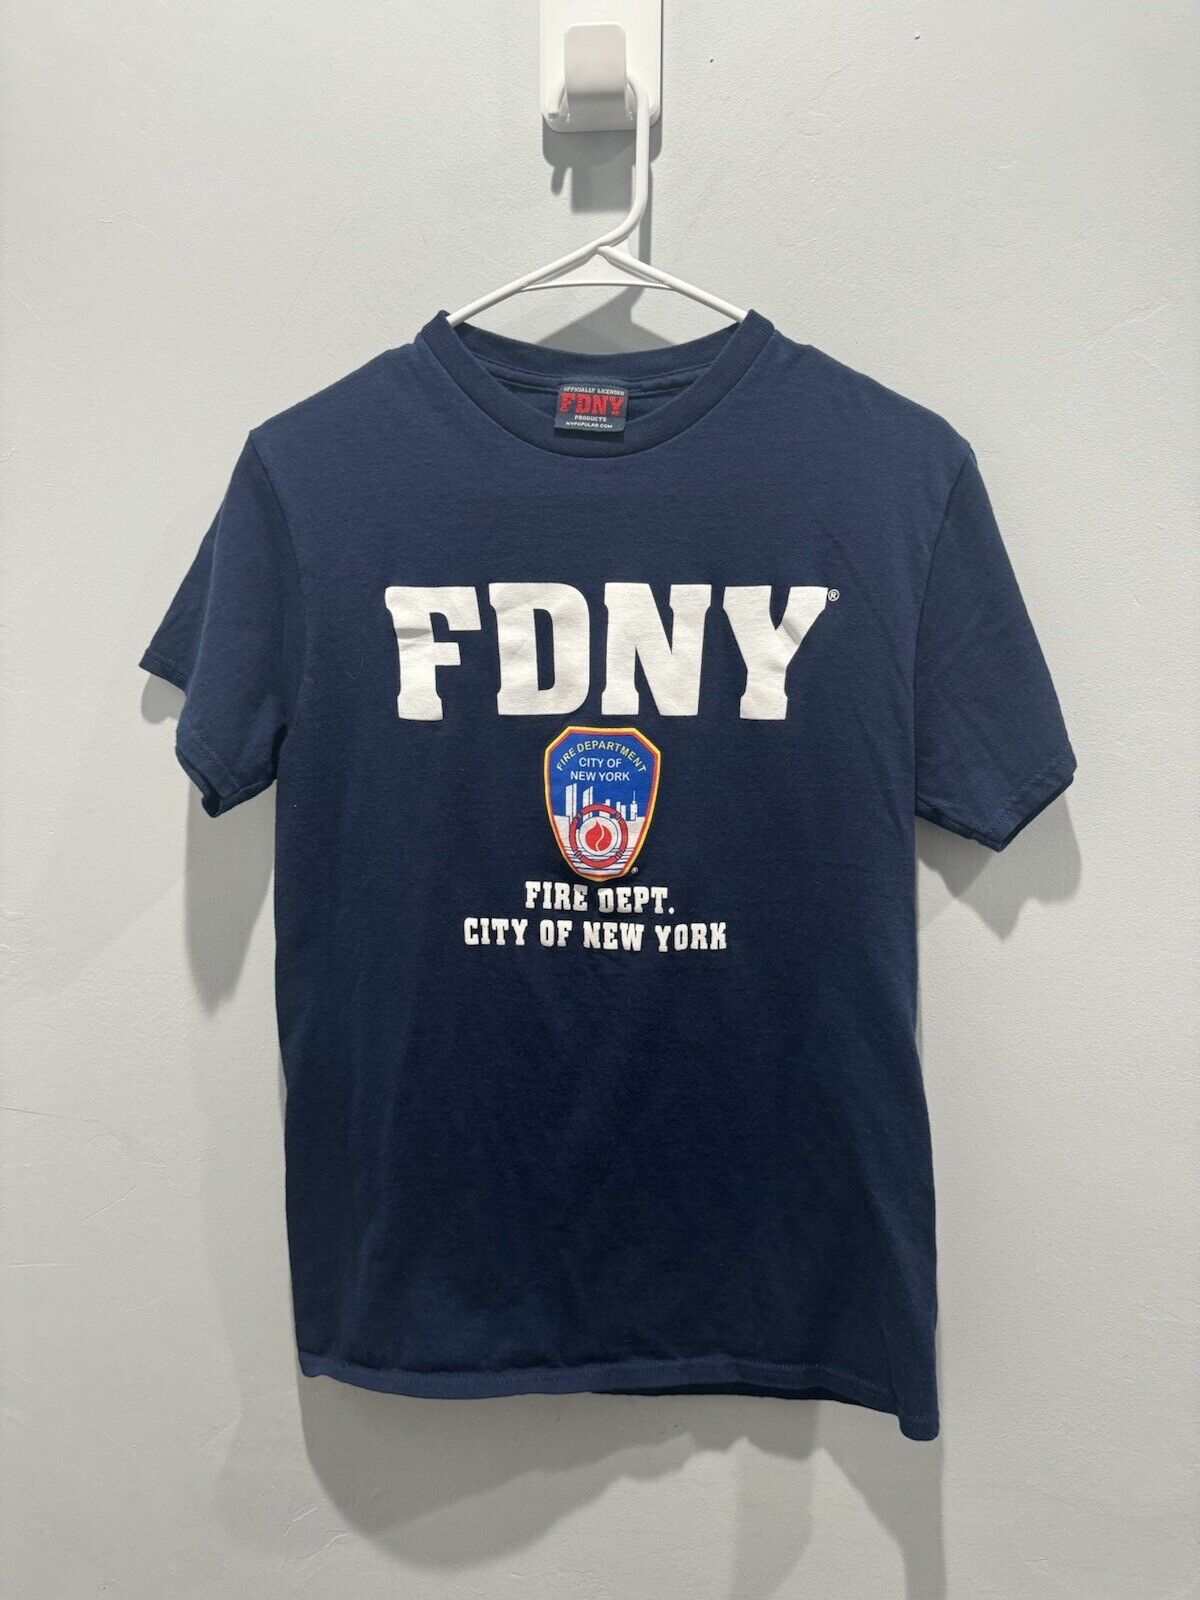 FDNY Fire Dept. City of New York Small T Shirt Officially Licensed Product Blue